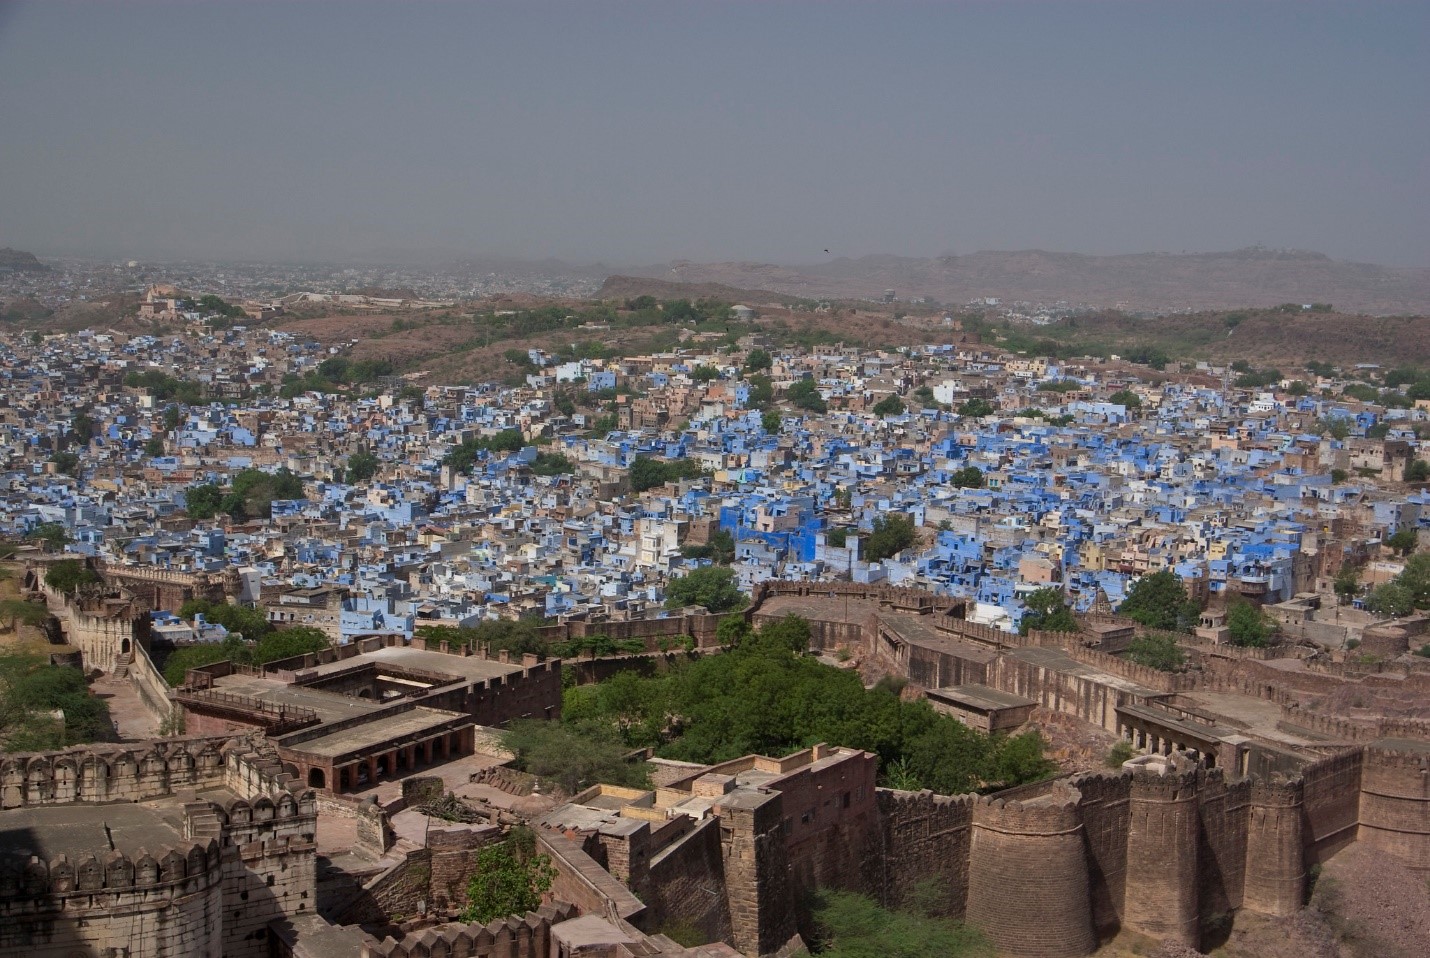 The city of Jodhpur as seen from the Mehrangarh fort. Image Source: Flickr